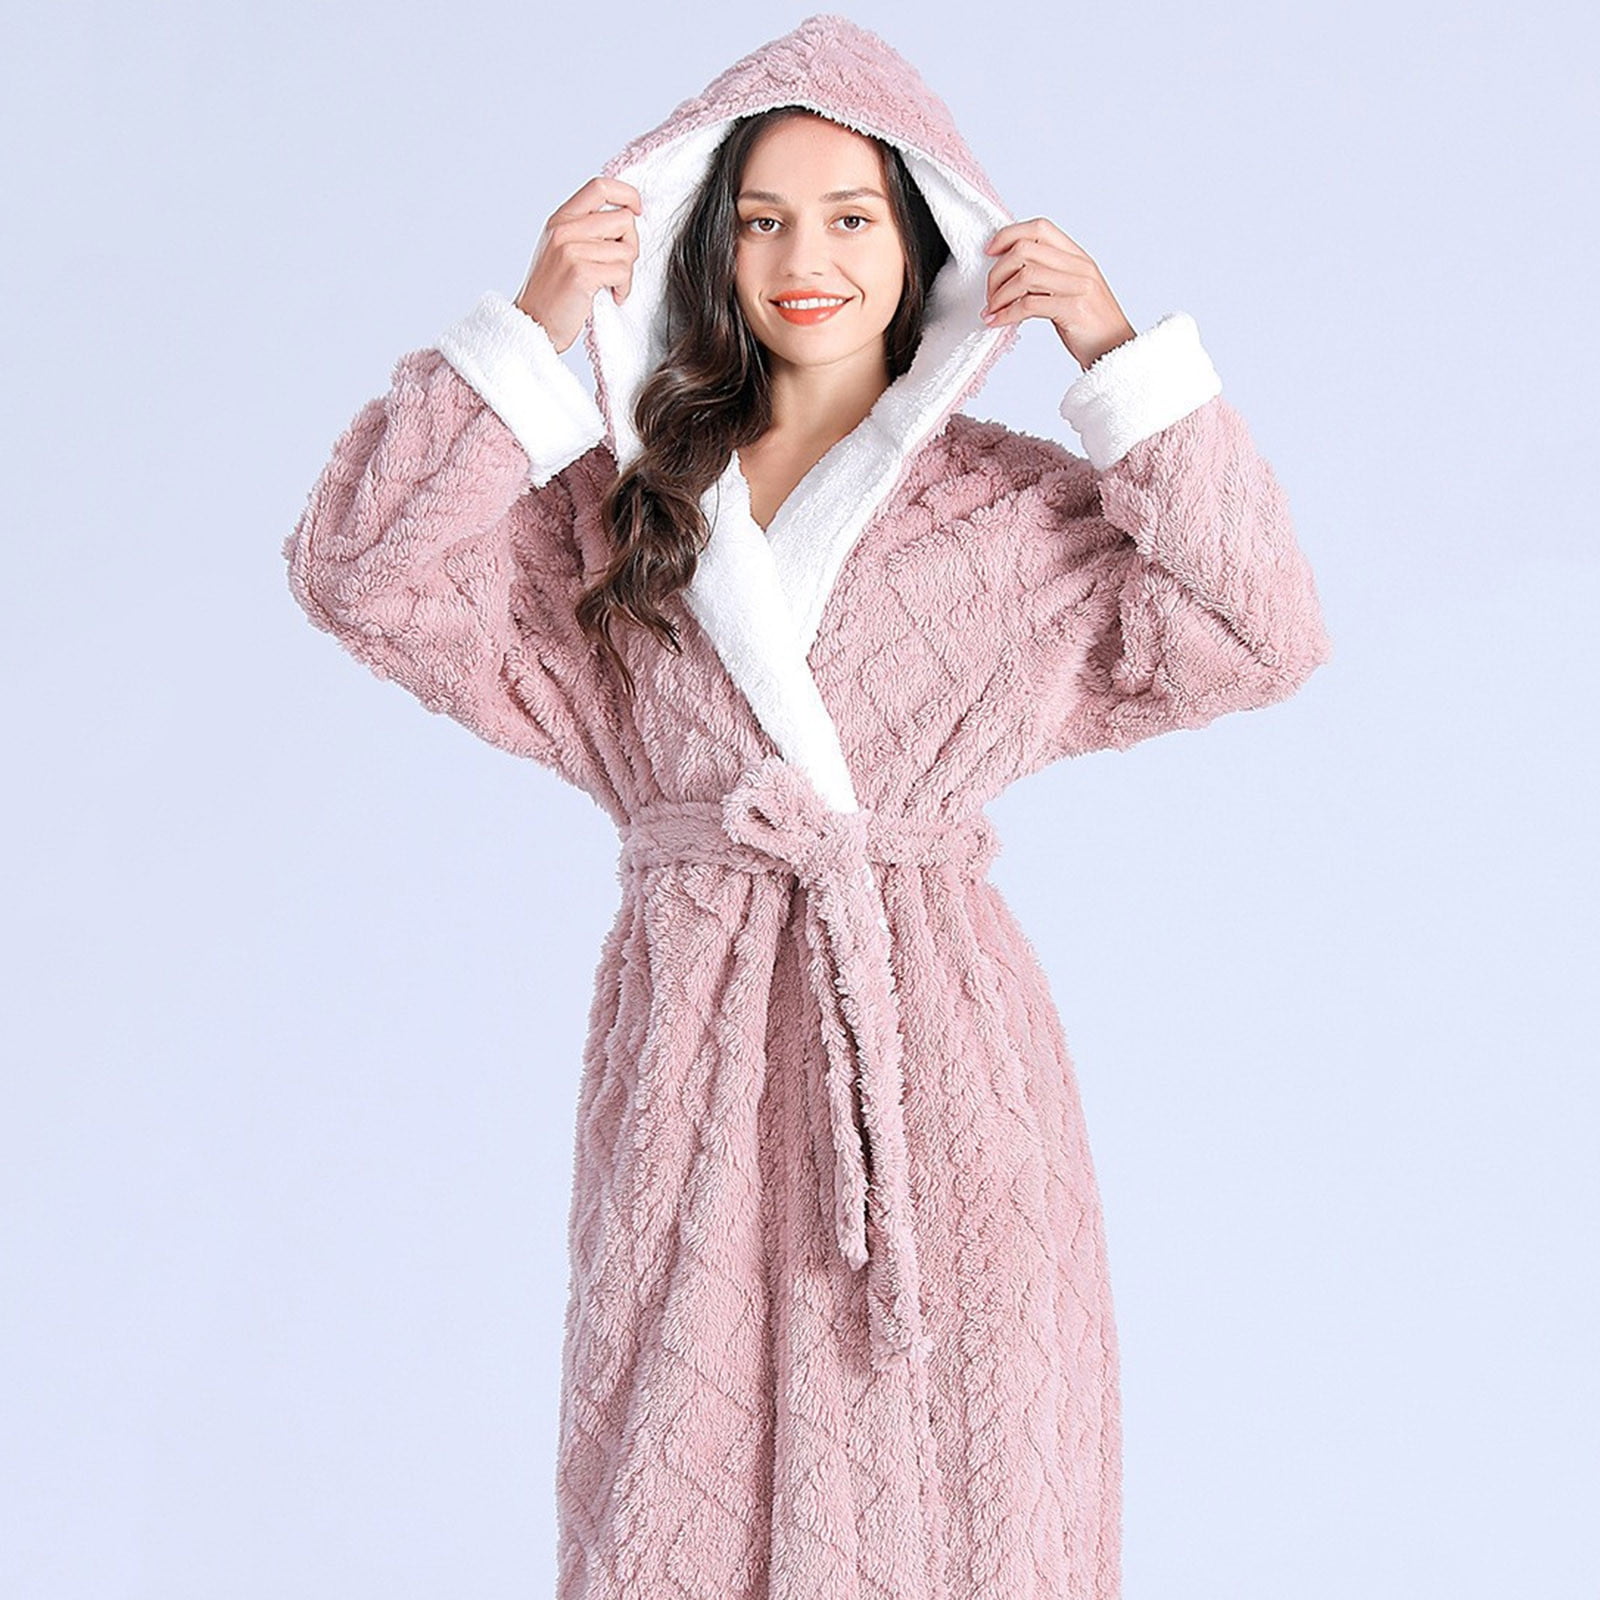 Summer New Europe And America Cross Border Pajamas Fashion Feather  Stitching Mesh Nightgown Ladies Homewear From Aieland, $23.16 | DHgate.Com  | Better Than Old Navy.